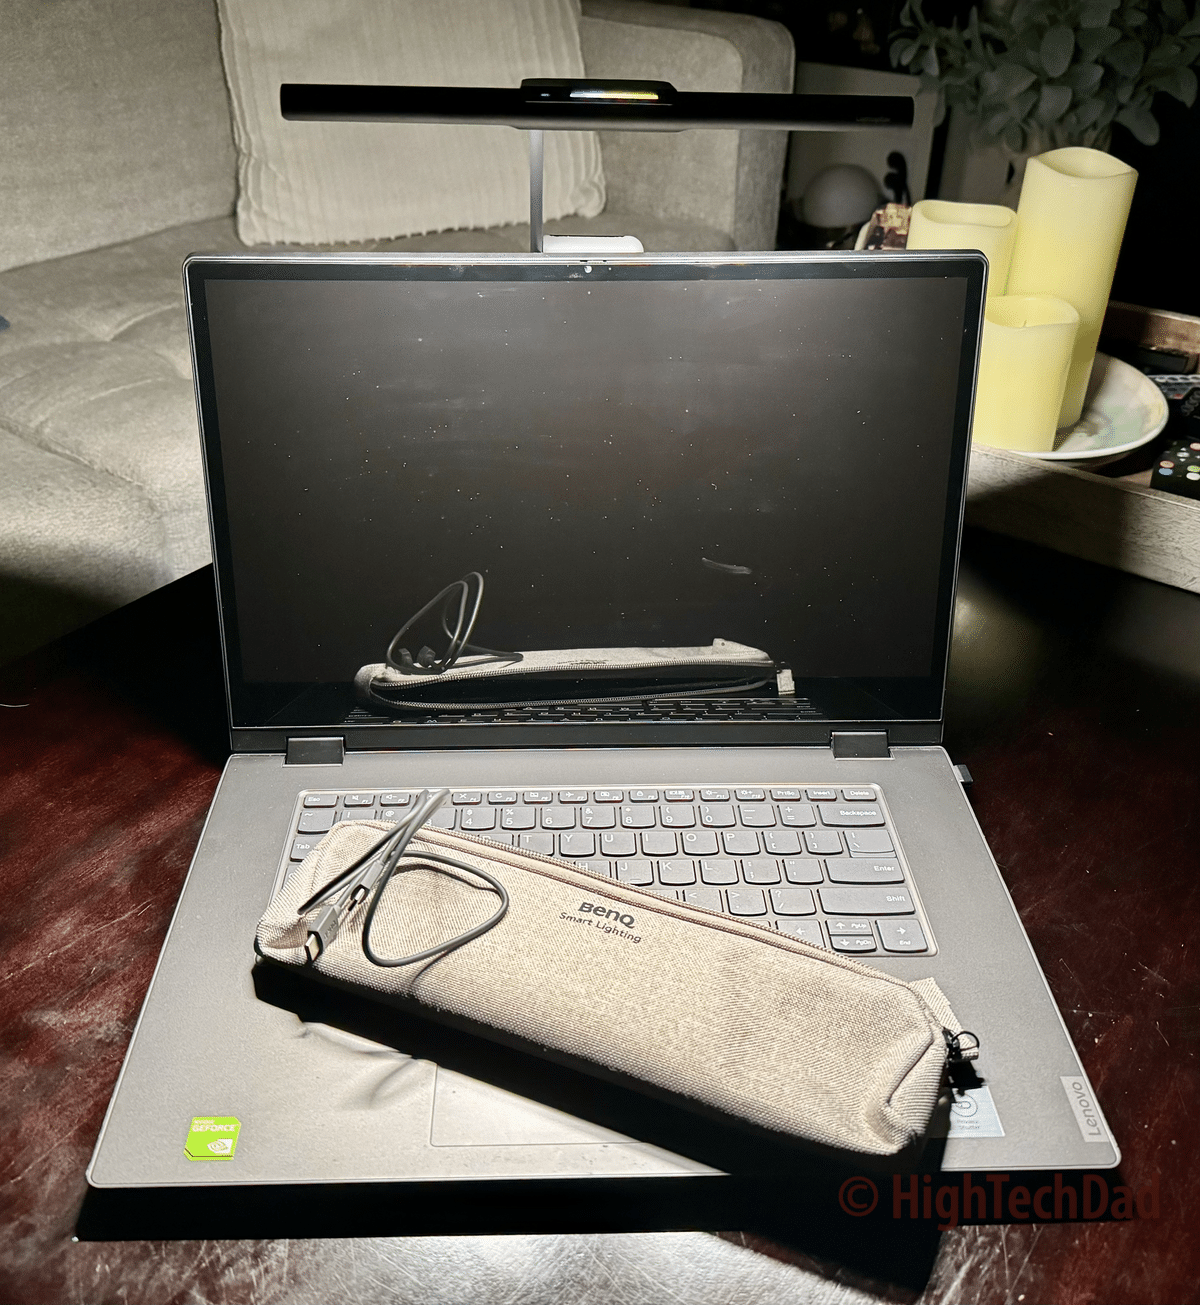 Extended mode, bag, USB-C cable - - BenQ Laptop Bar Light - HighTechDad Review